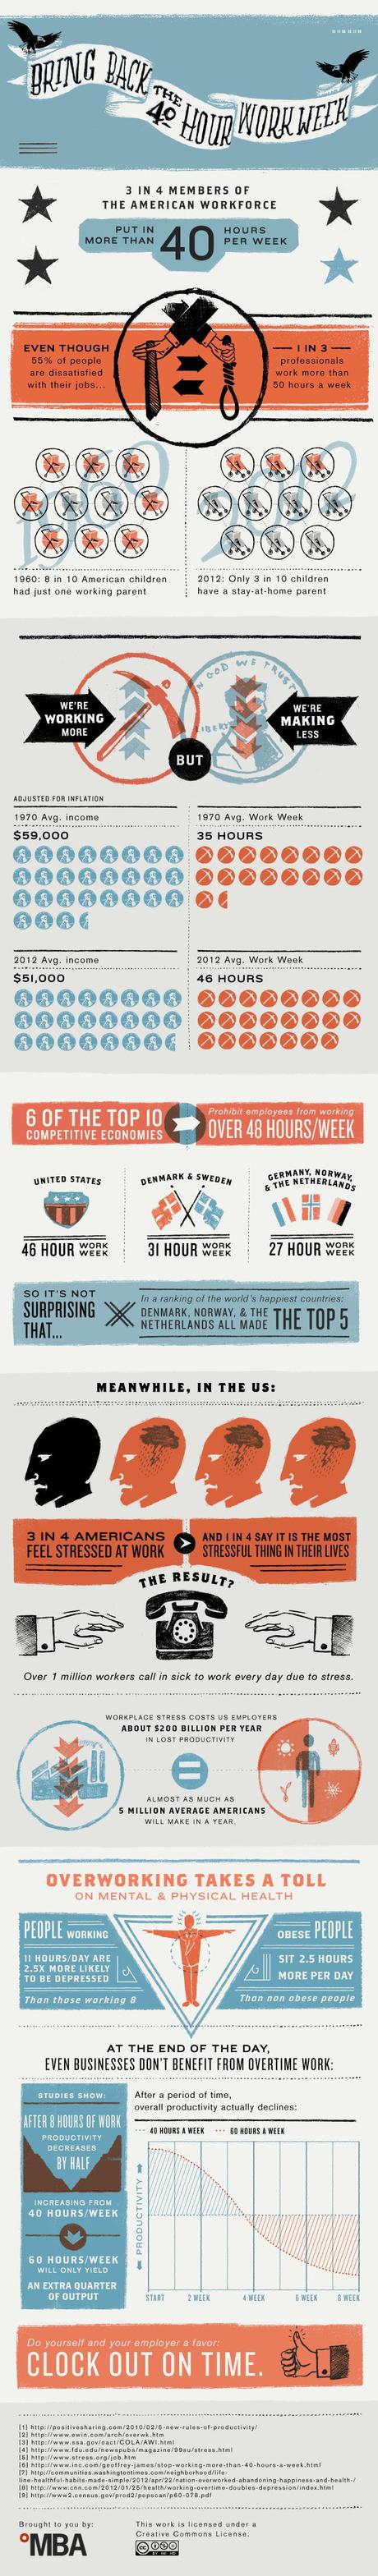 Bring Back the 40 Hour Work Week Infographic